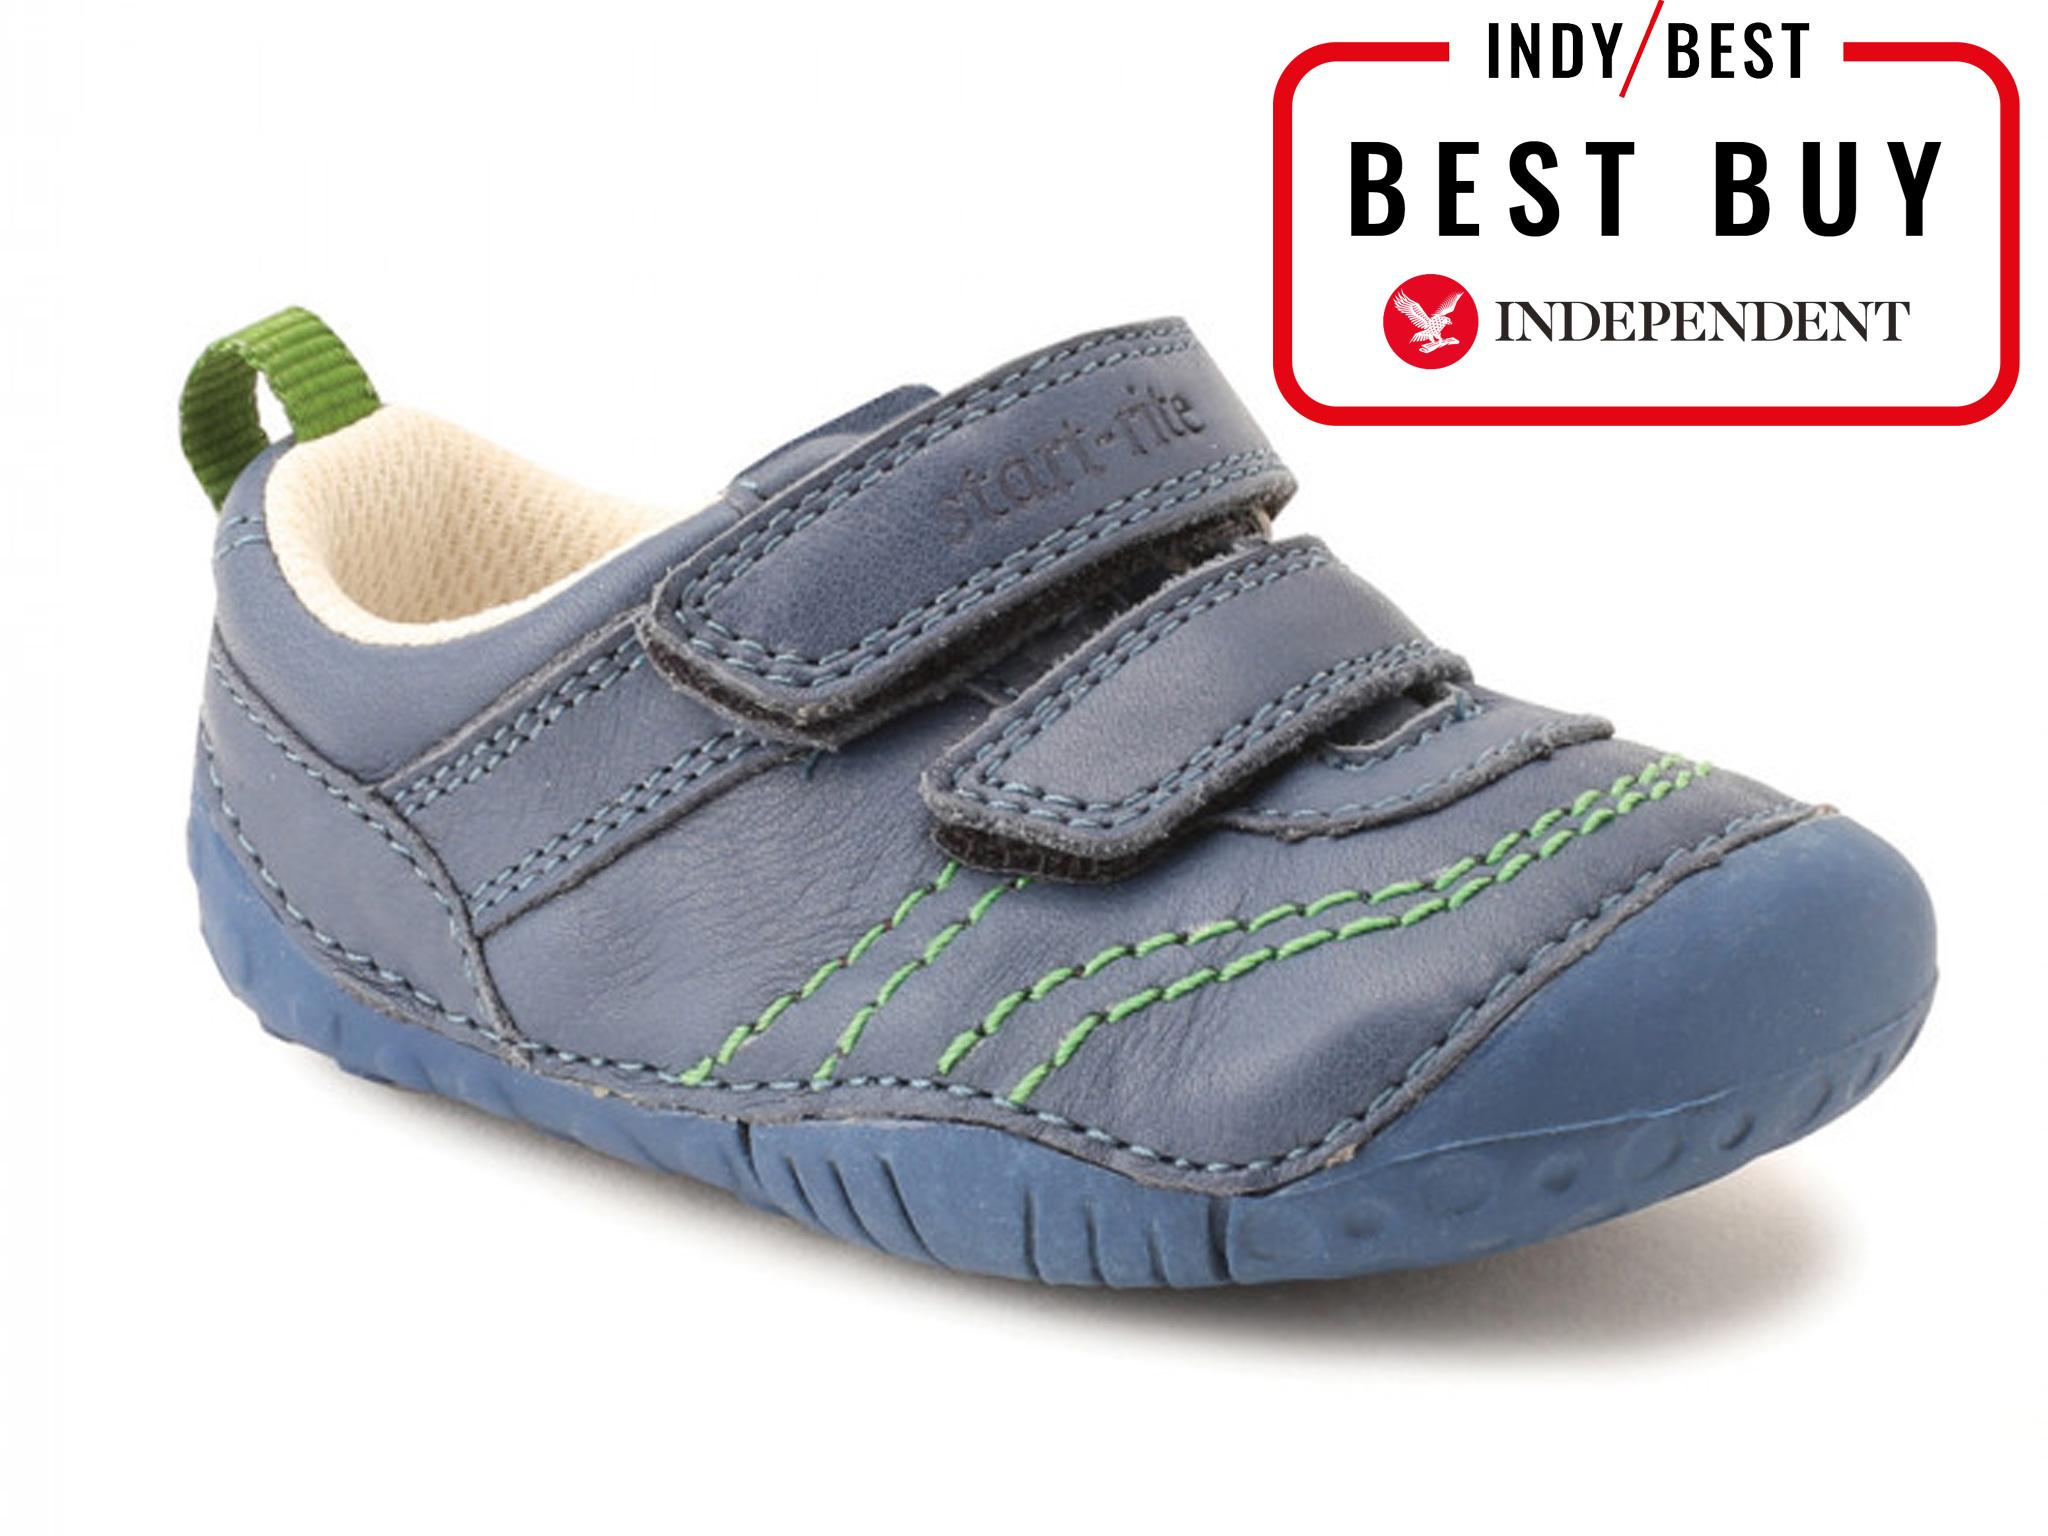 best shoes for baby learning to walk uk